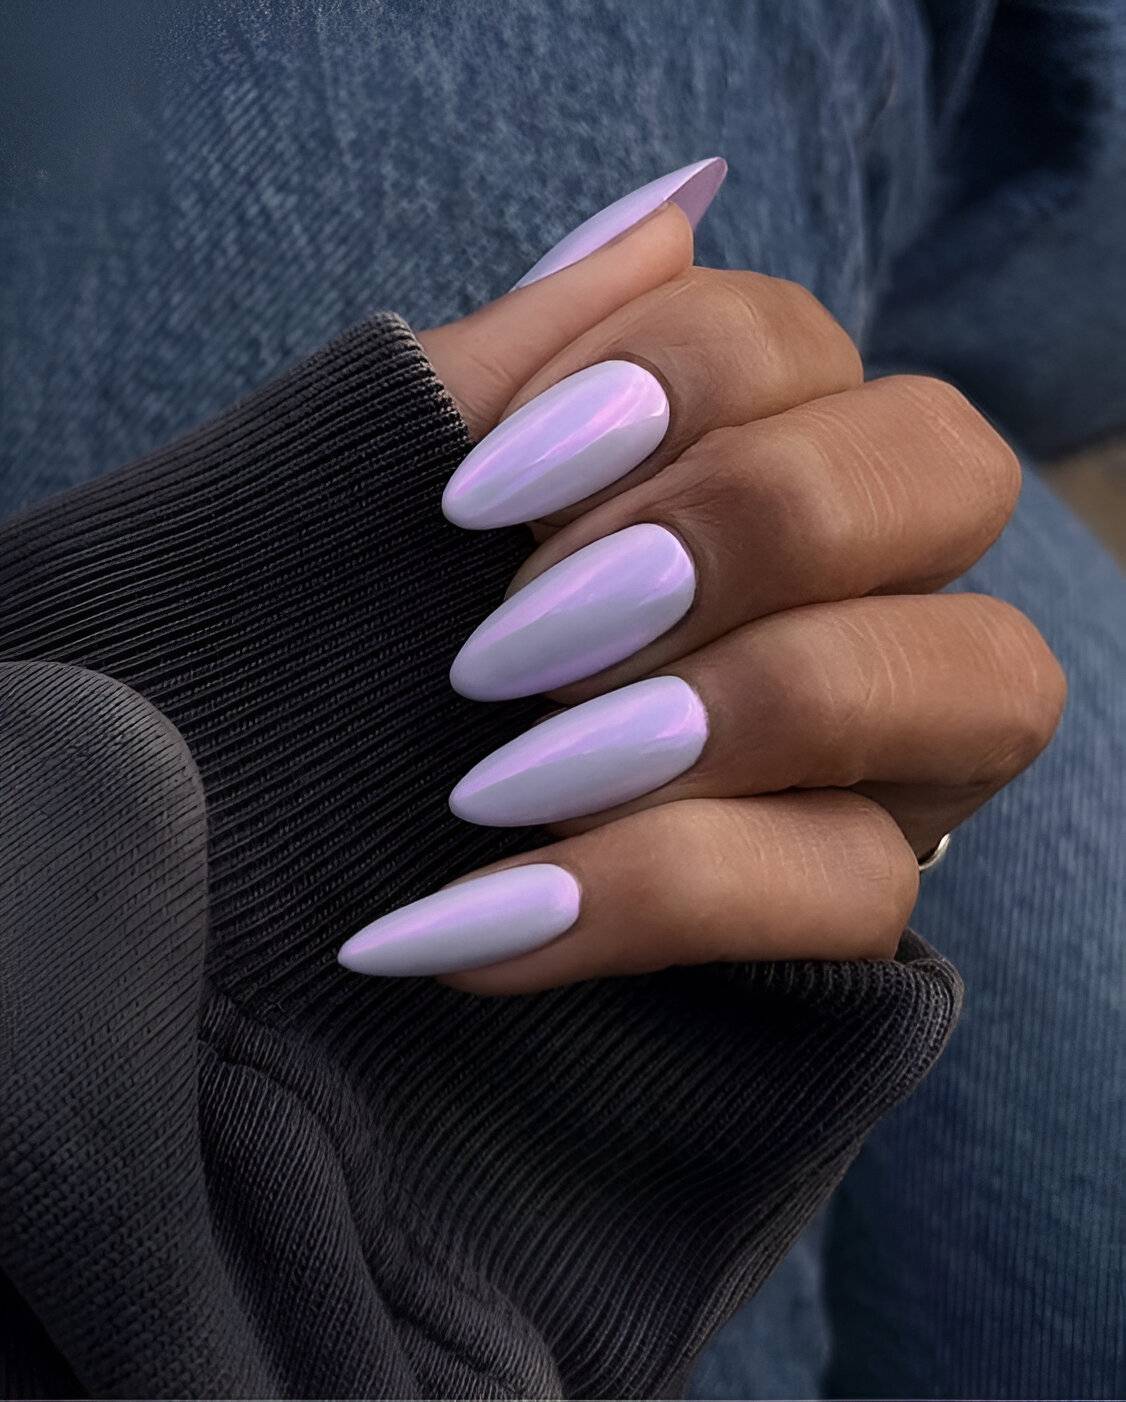 30 Chic Chrome Nail Designs For The Ultimate Glam Look - 209